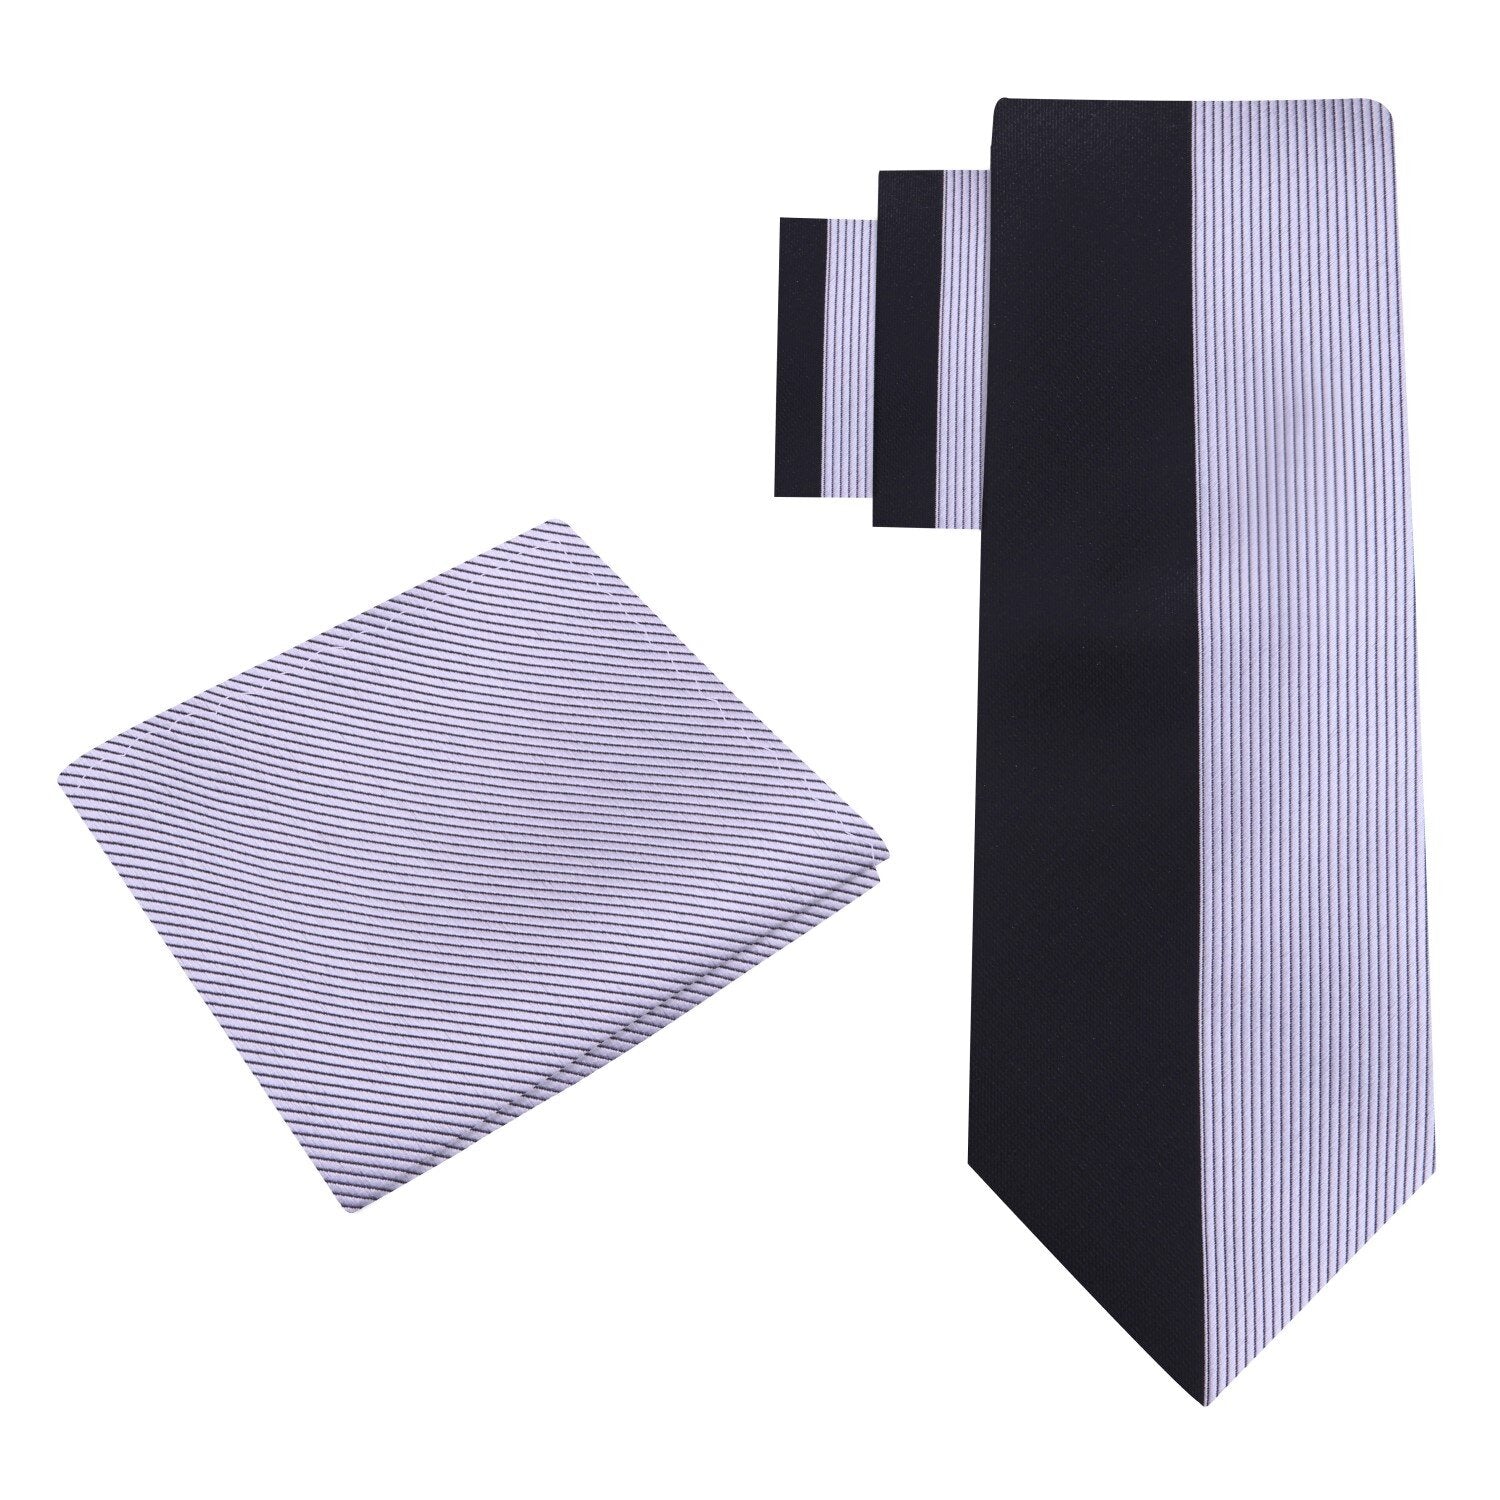 Alt View: A Black, Silver Geometric Lined Pattern Silk Necktie, Solid Grey Pocket Square